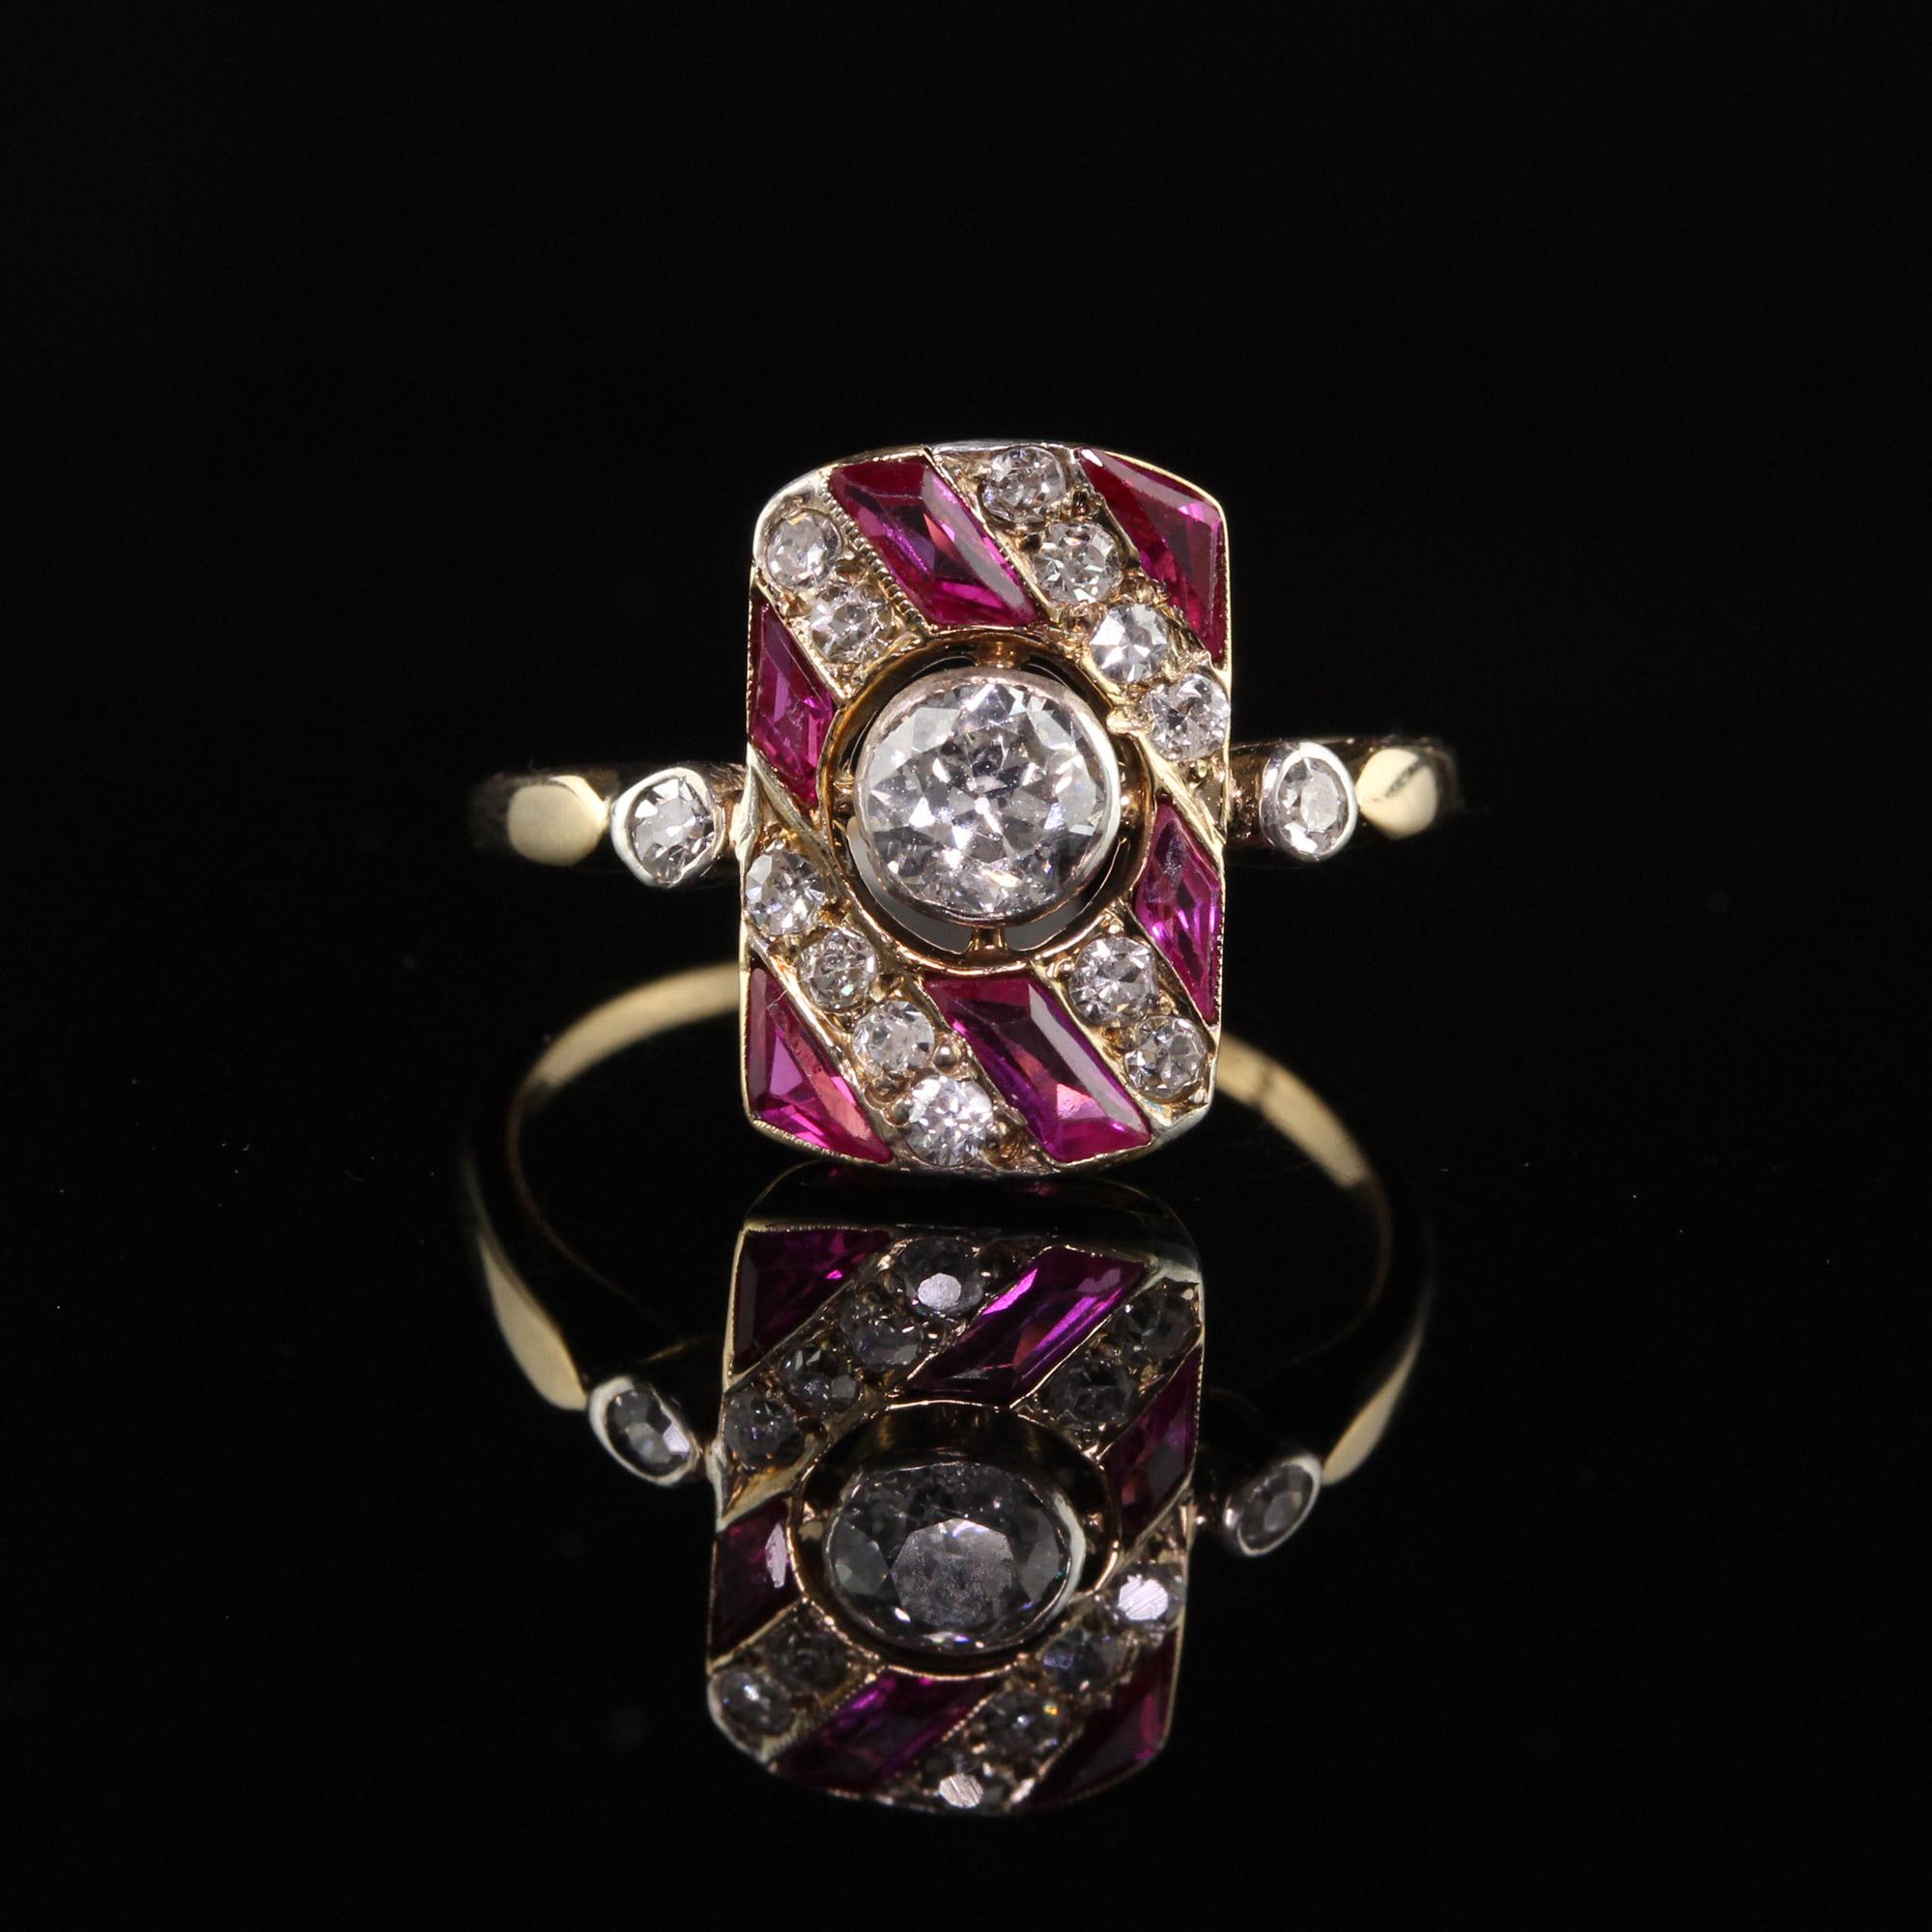 Old Mine Cut Antique Edwardian 14K Yellow Gold Old Mine Diamond and Ruby Ring